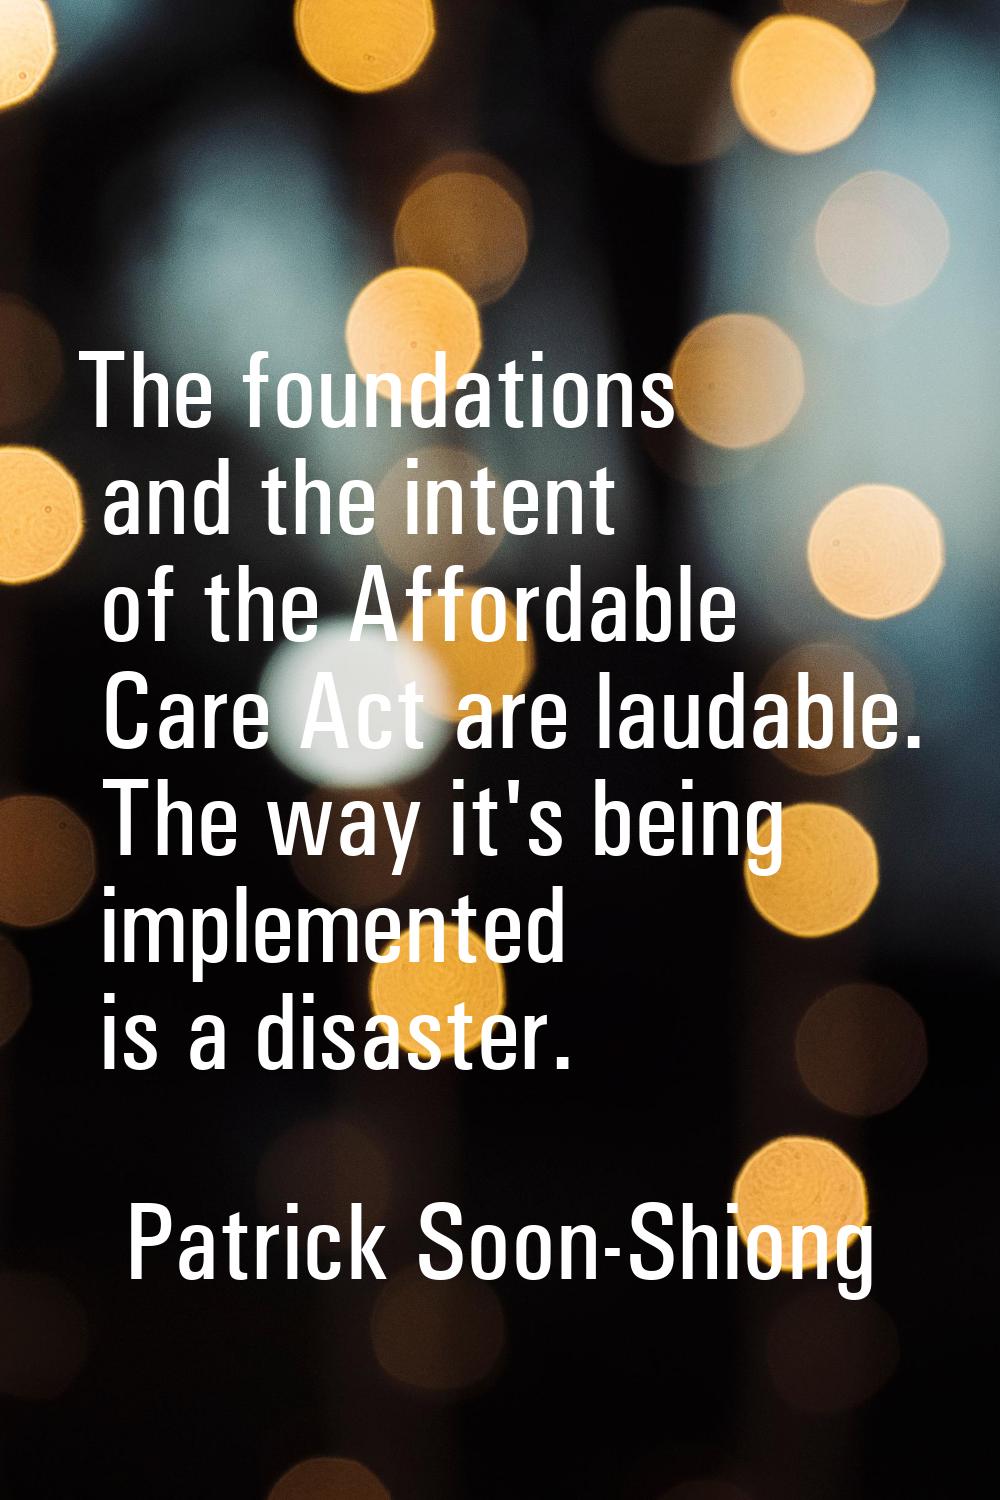 The foundations and the intent of the Affordable Care Act are laudable. The way it's being implemen